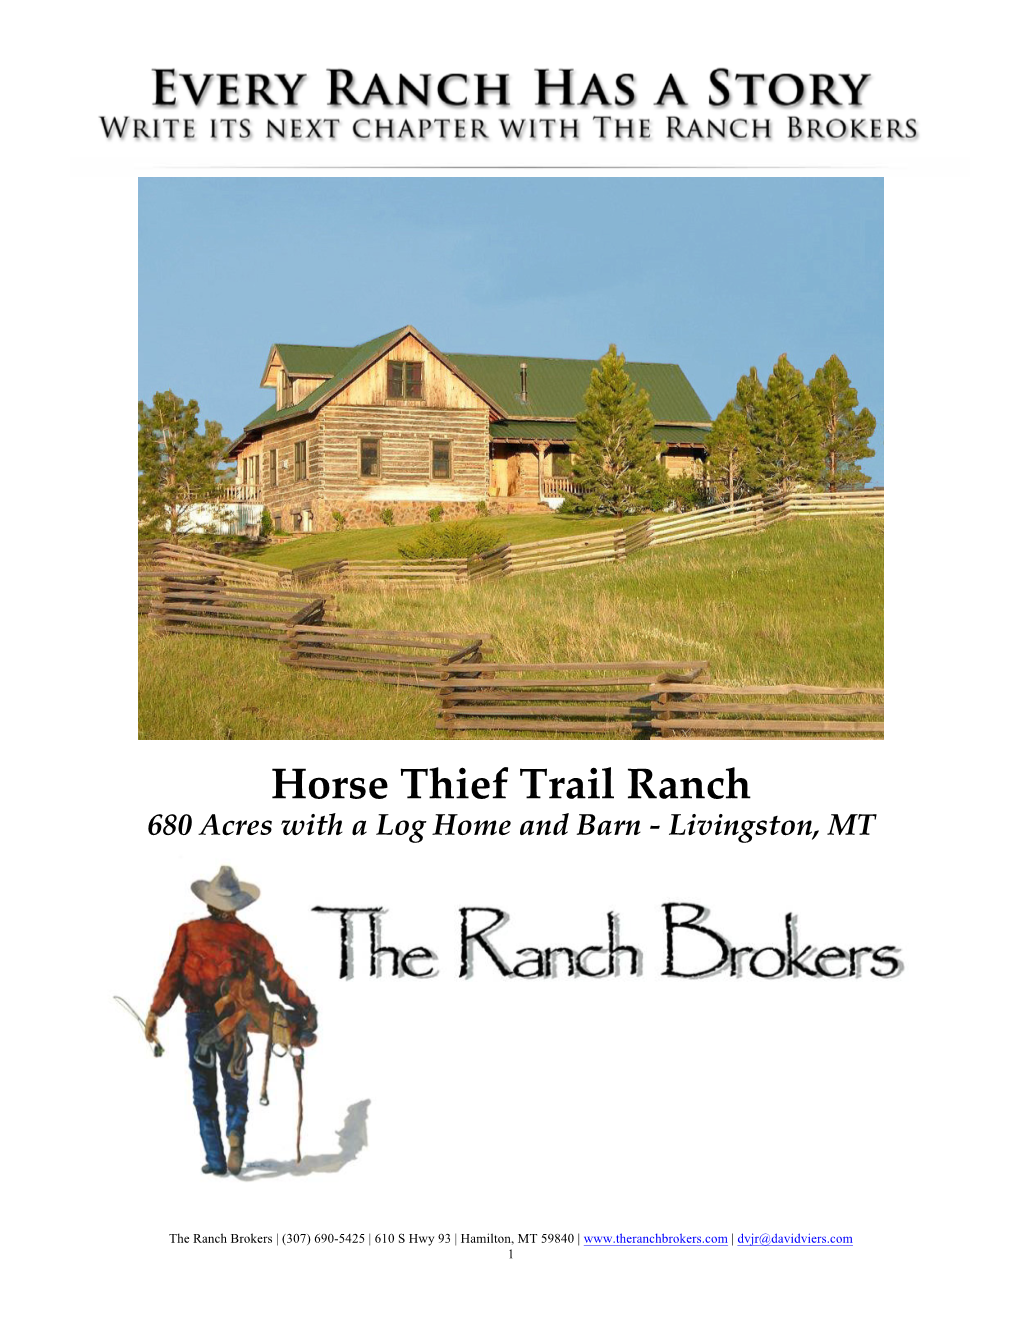 Horse Thief Trail Ranch 680 Acres with a Log Home and Barn - Livingston, MT!